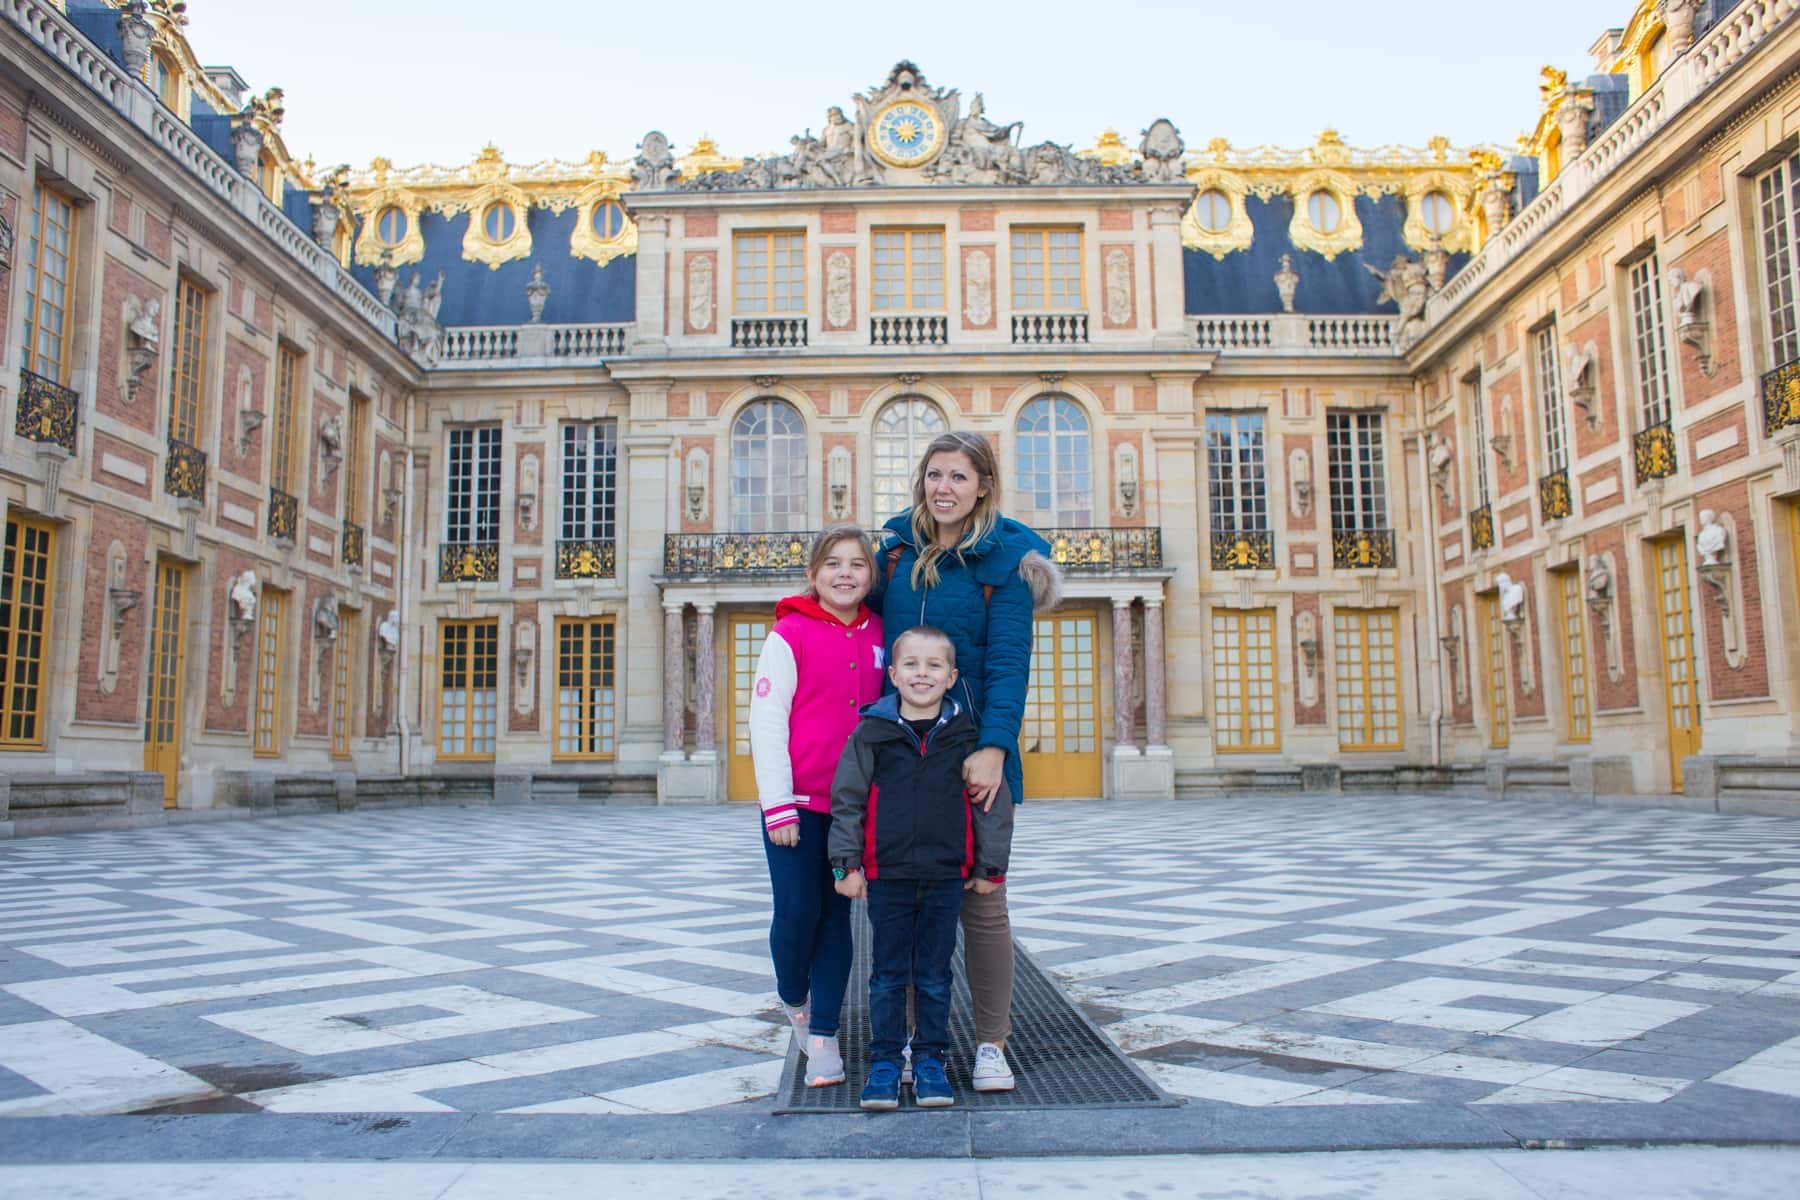 Lauren Brooke and Blake in front of the Palace of Versailles